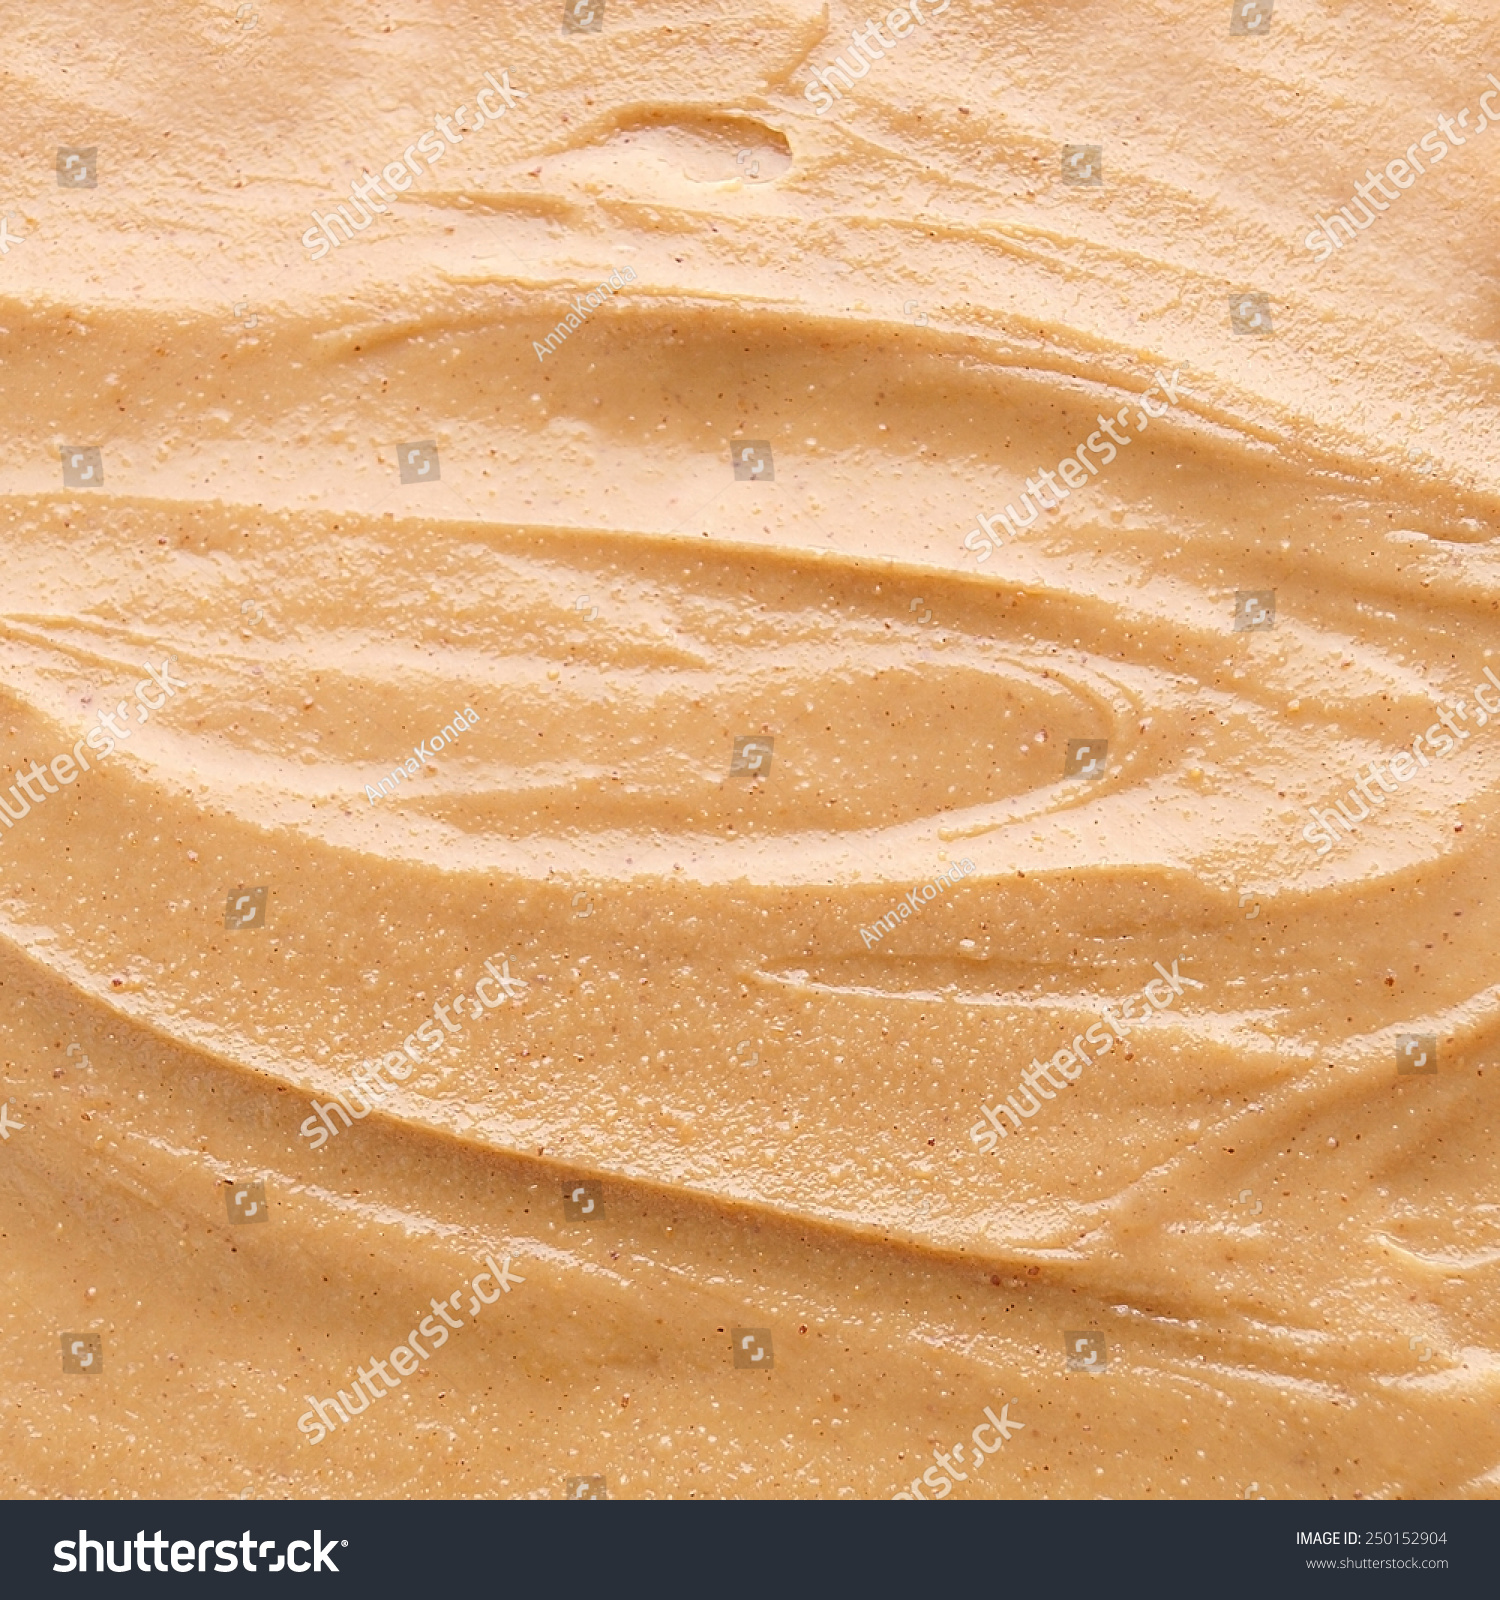 Peanut Butter Texture Background Stock Photo (Royalty Free ...